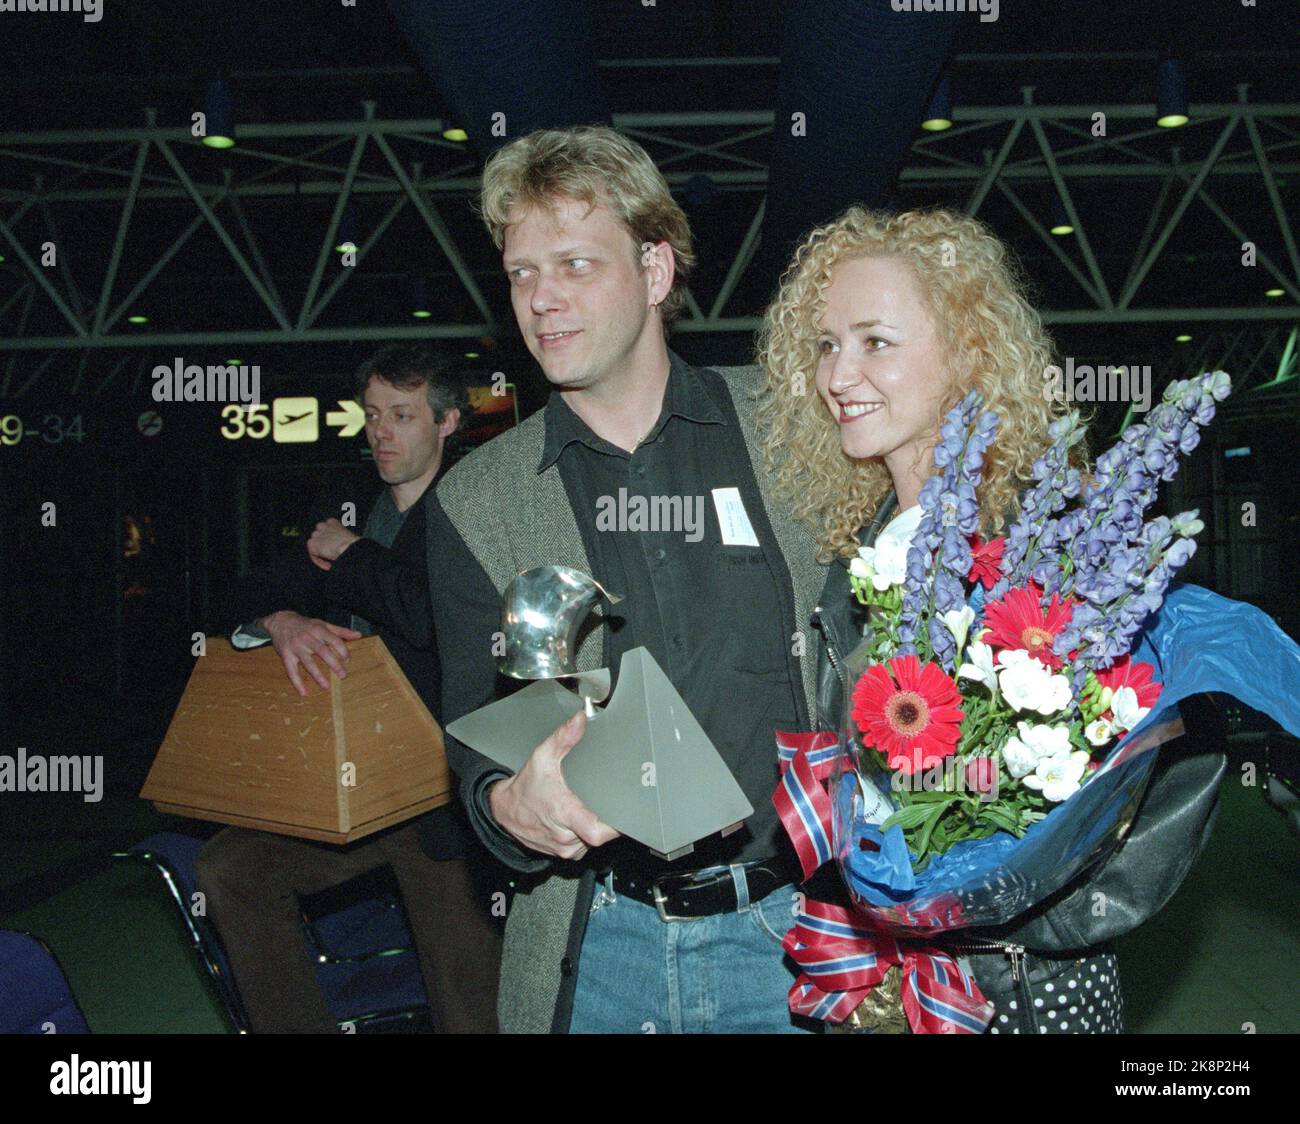 Oslo 19950515. The winners of the Eurovision Song Contest 1995, 'Secret Garden', with Rolf Løvland and violinist Fionnuala Sherry, smile at the photographers after arriving at Fornebu. In the background: NRK's Odd Arvid Strømstad. Photo: Morten F. Holm / Ntbscanpix  Scannef: Secret3 Stock Photo